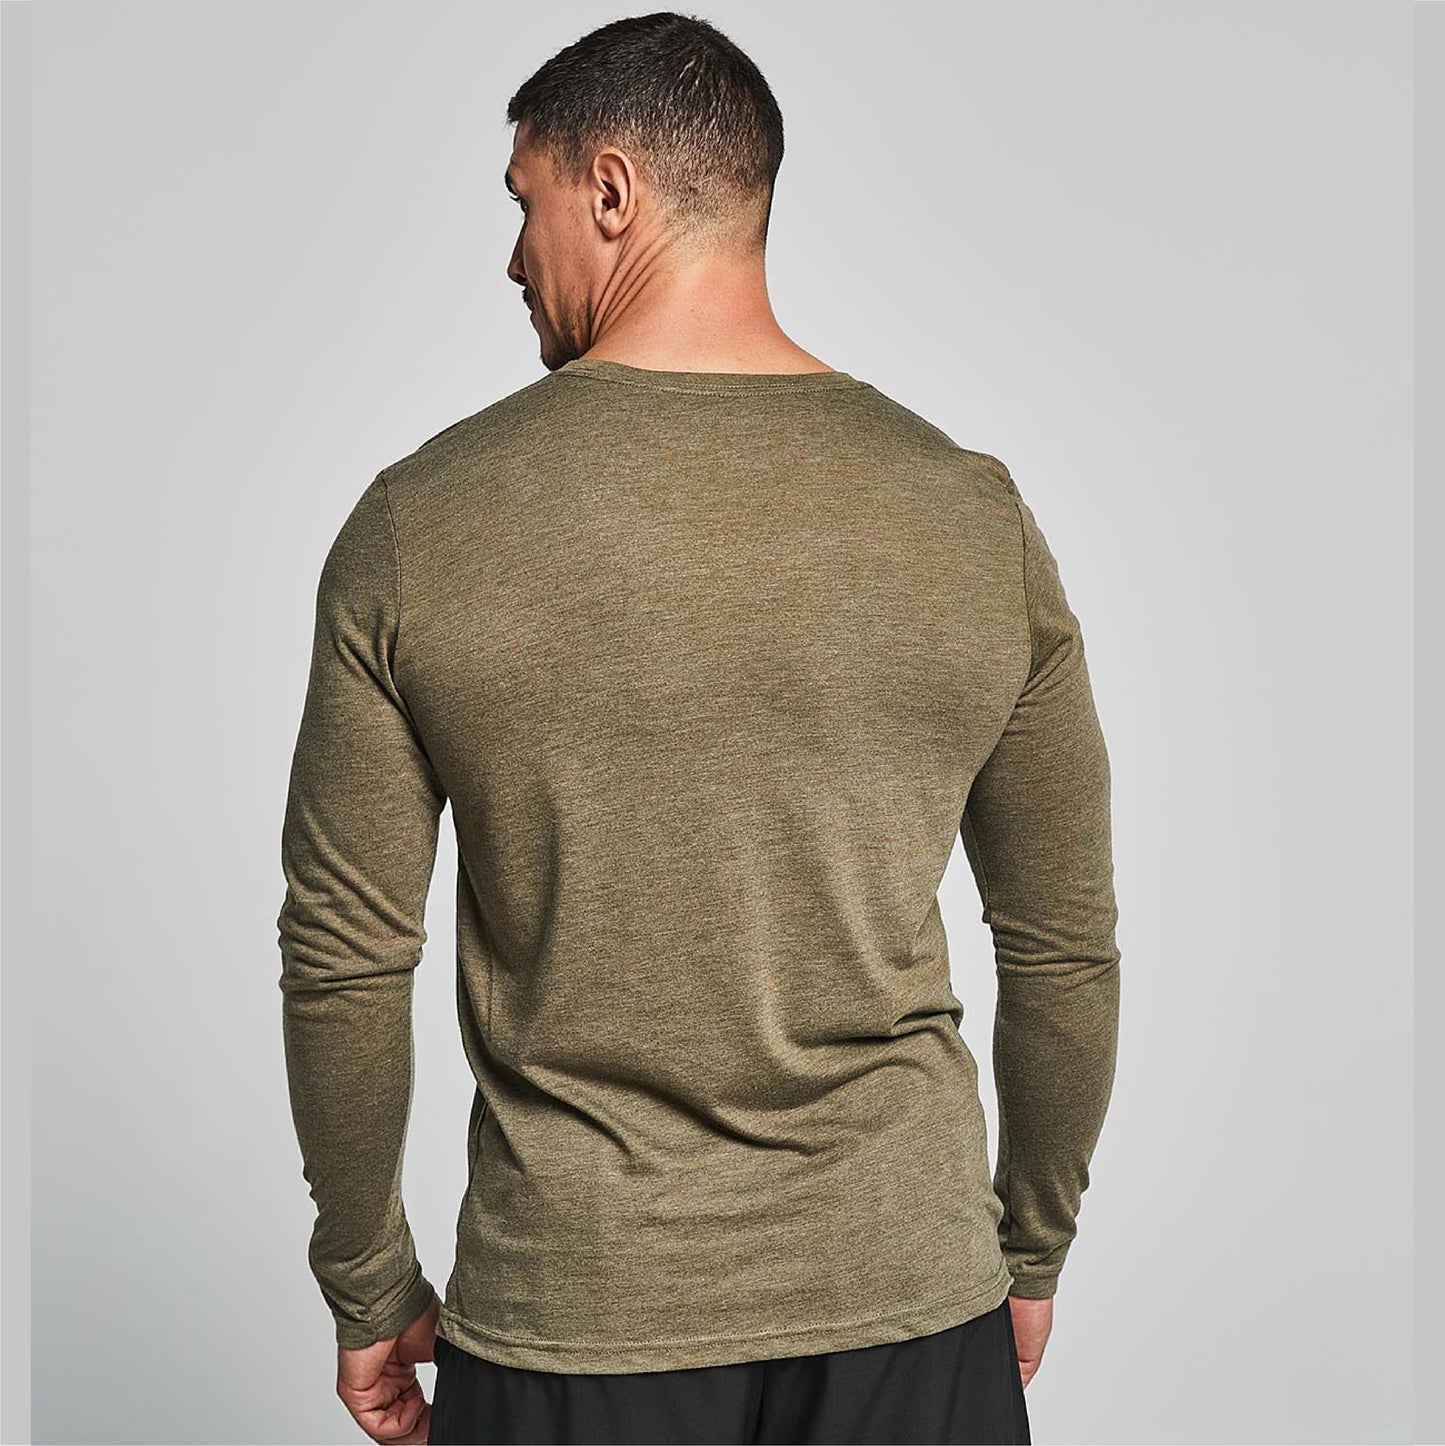 T-SHIRT MANCHES LONGUES NOMADE - MILITARY GREEN - UNCHAINED